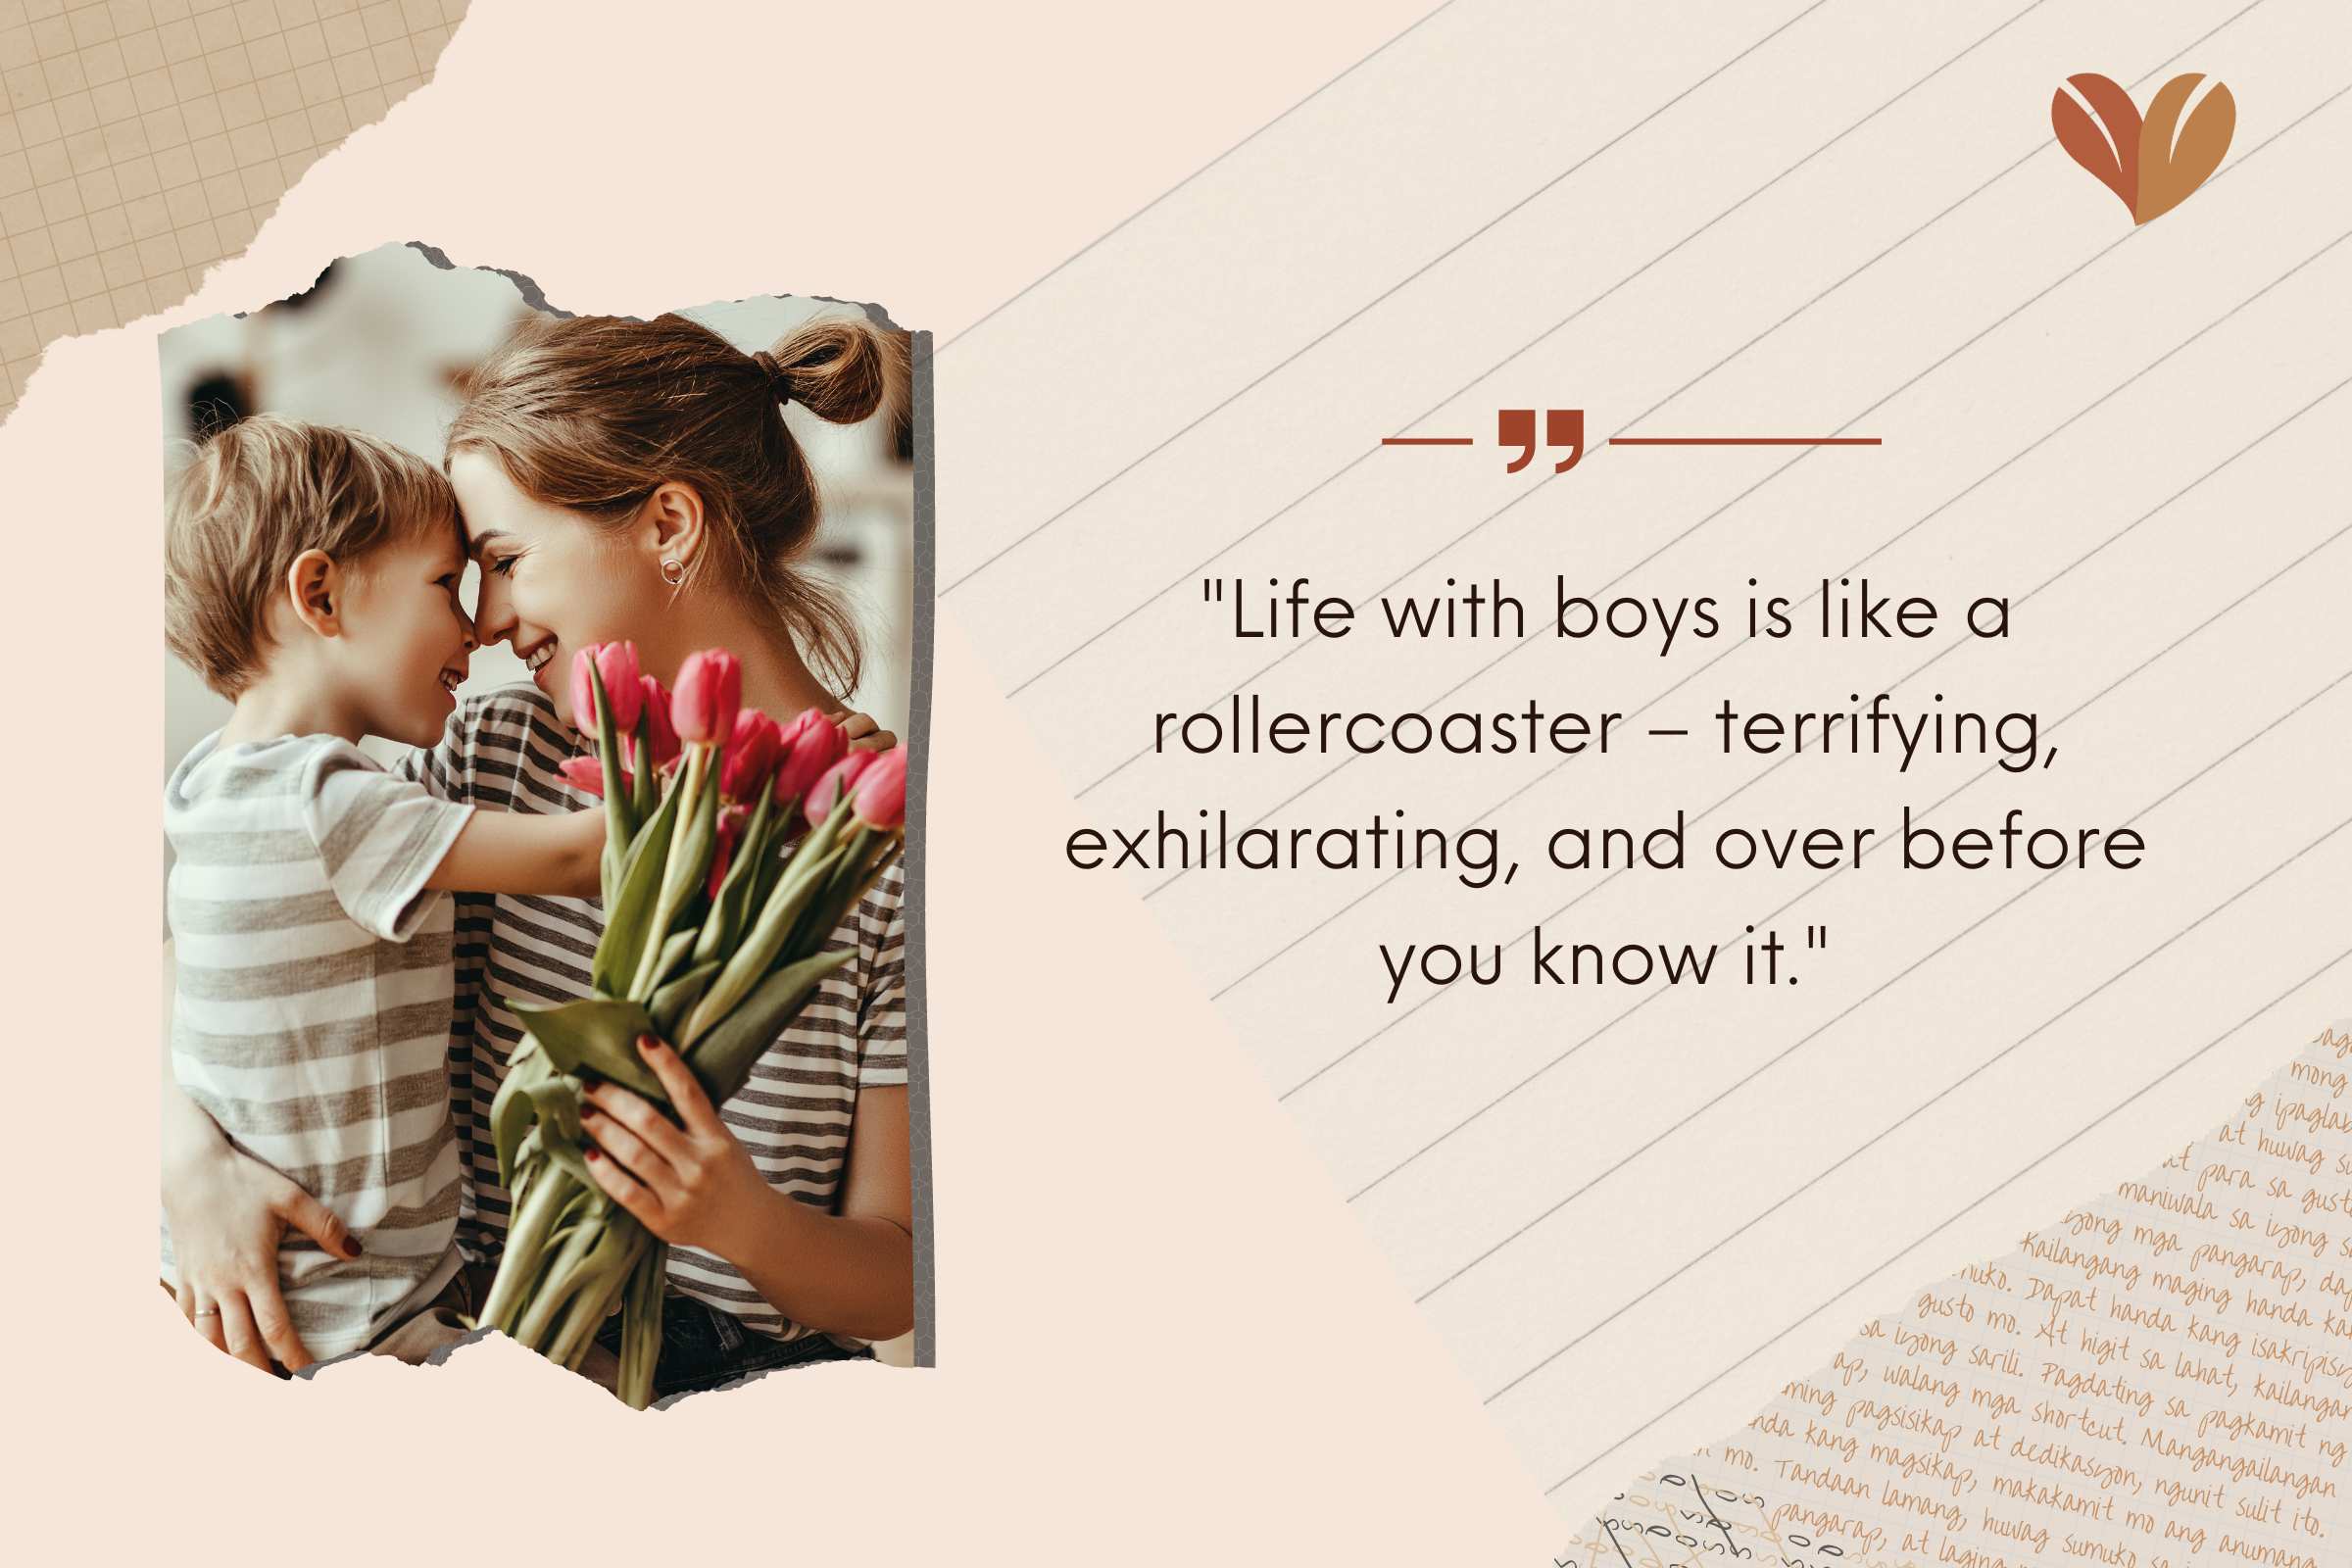 Life with boys is like a rollercoaster – terrifying, exhilarating, and over before you know it.